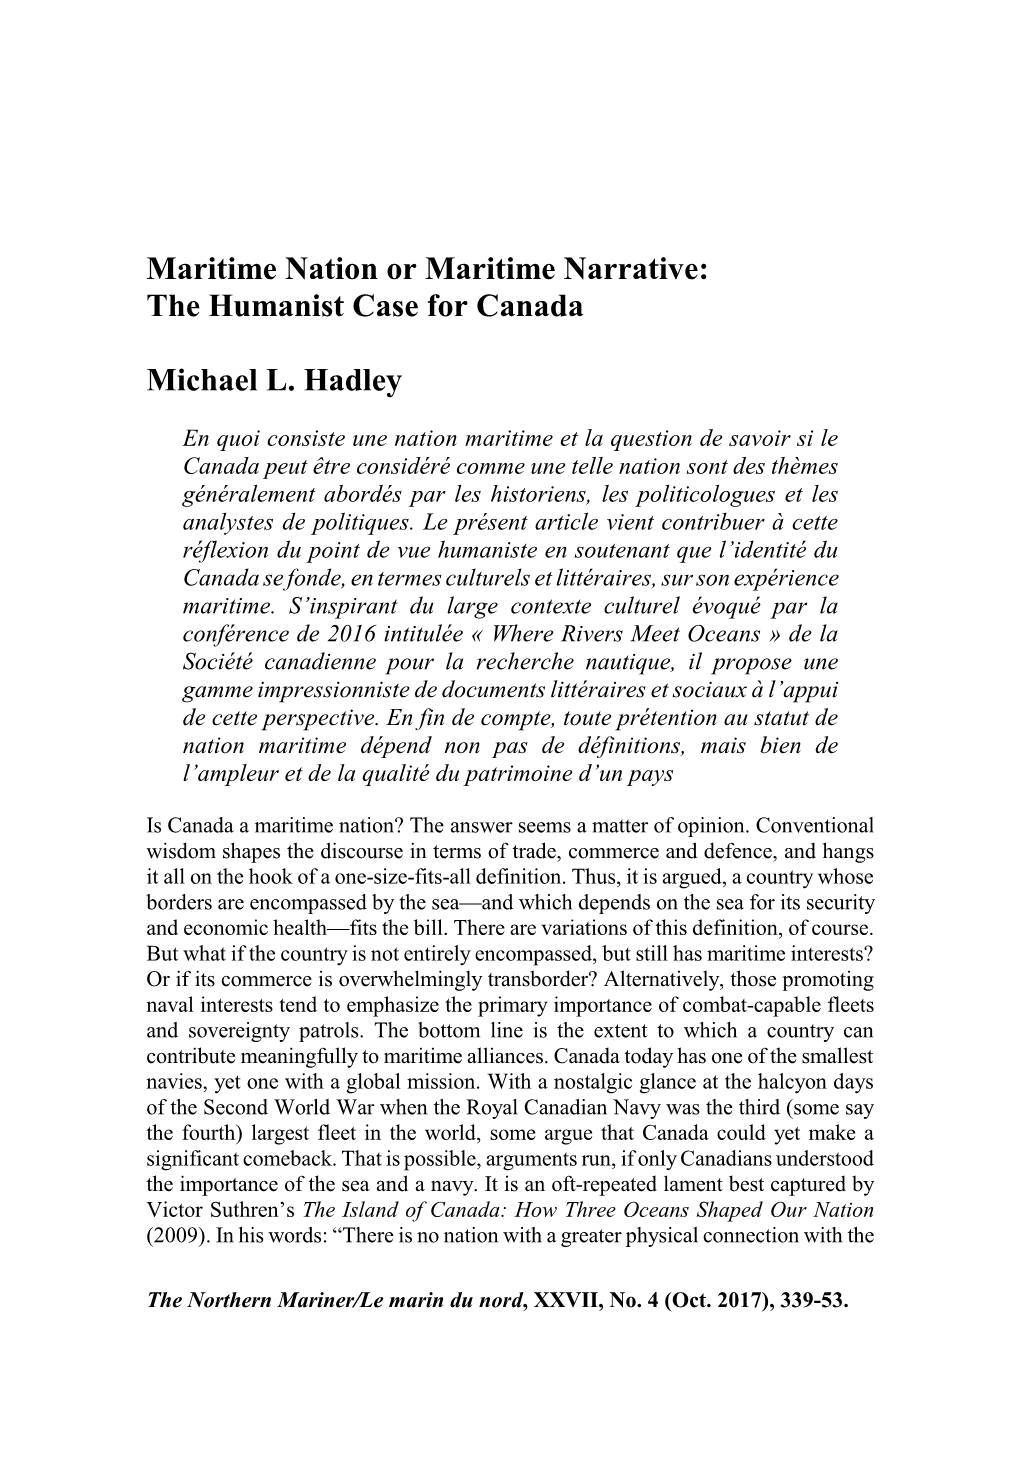 Maritime Nation Or Maritime Narrative: the Humanist Case for Canada